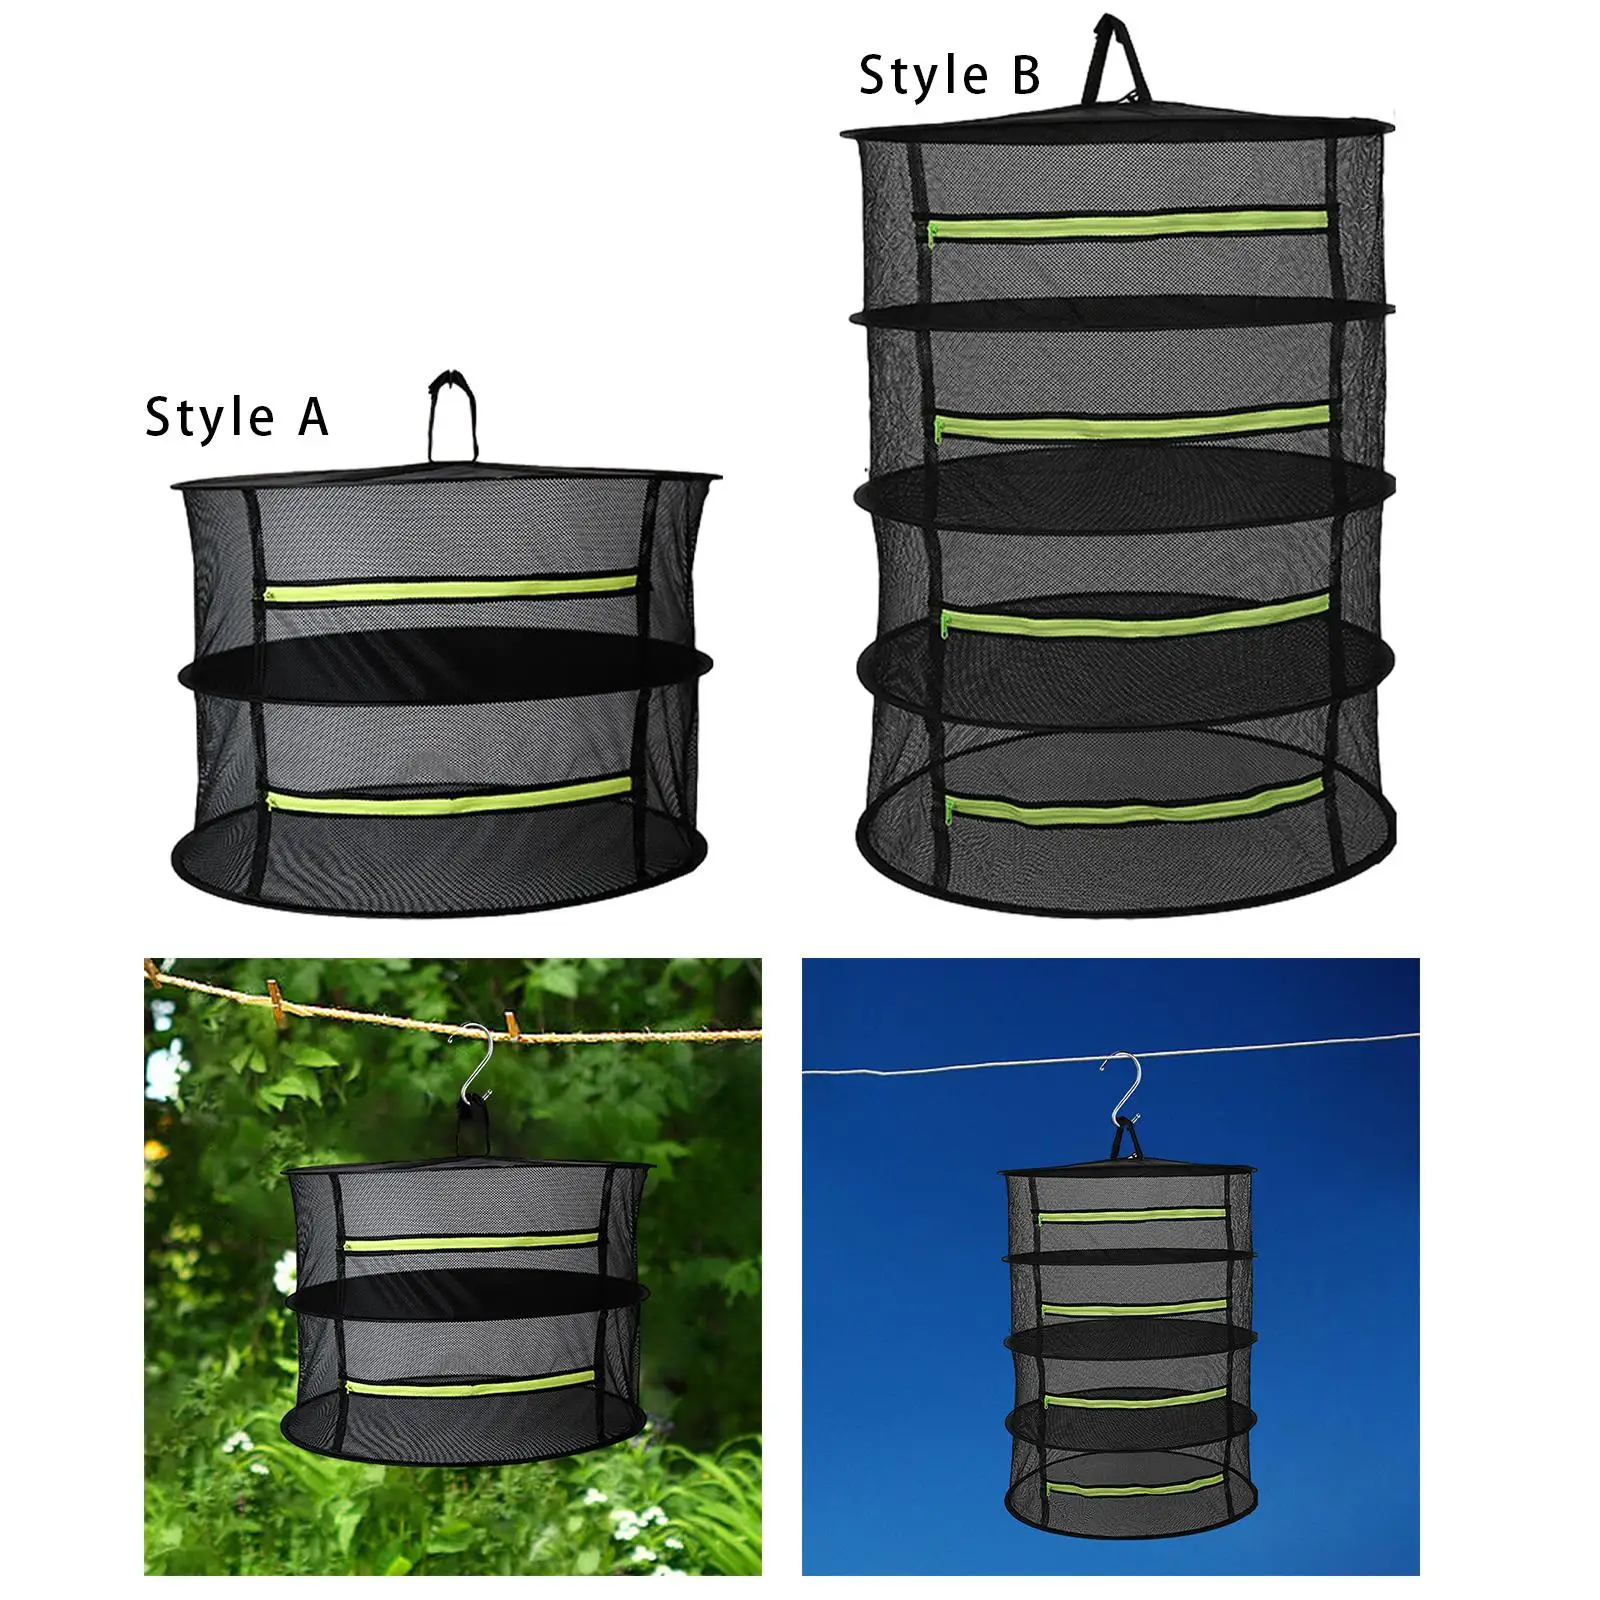 Herb Drying Rack Collapsible with Hook and Storage Bag Mesh Dryer for Hydroponics Fruits Vegetable Garden Outdoor Flowers